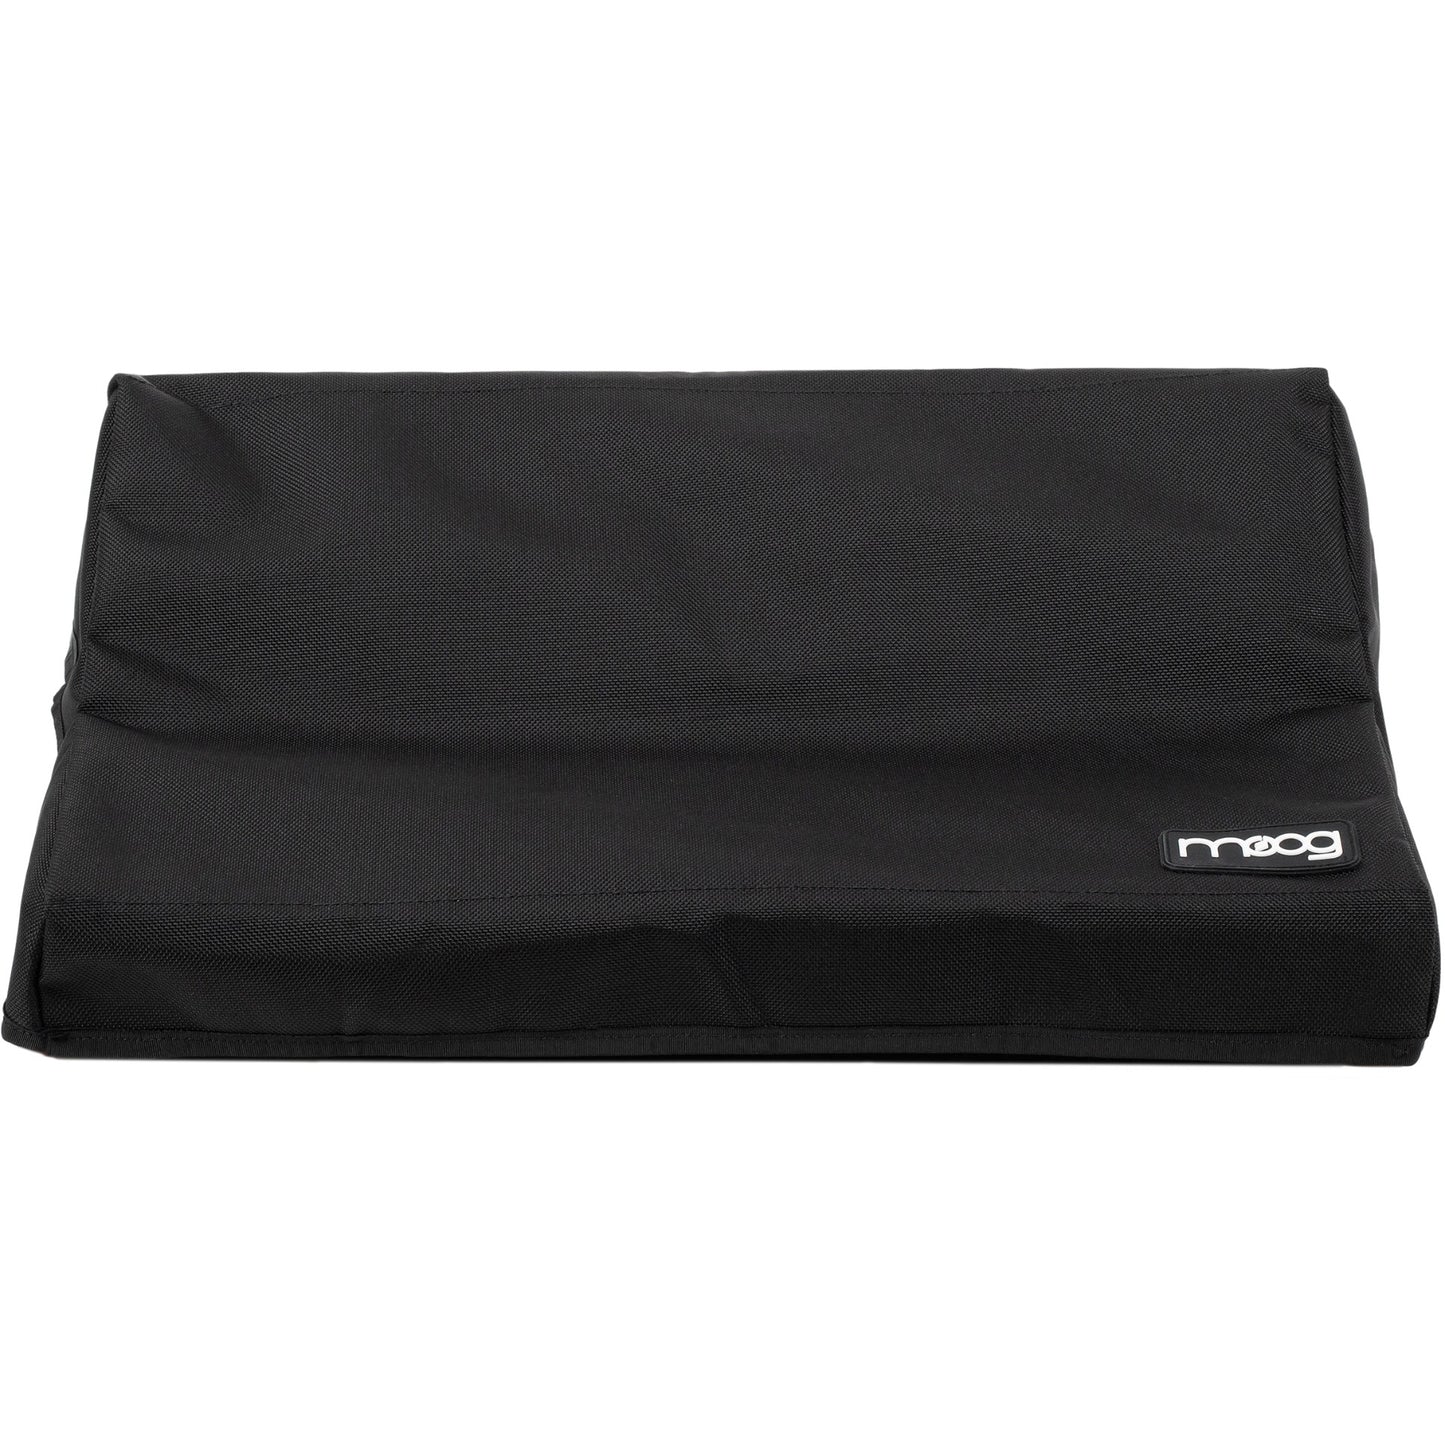 Moog RES-COV-SUB25 Subsequent 25 Dust Cover